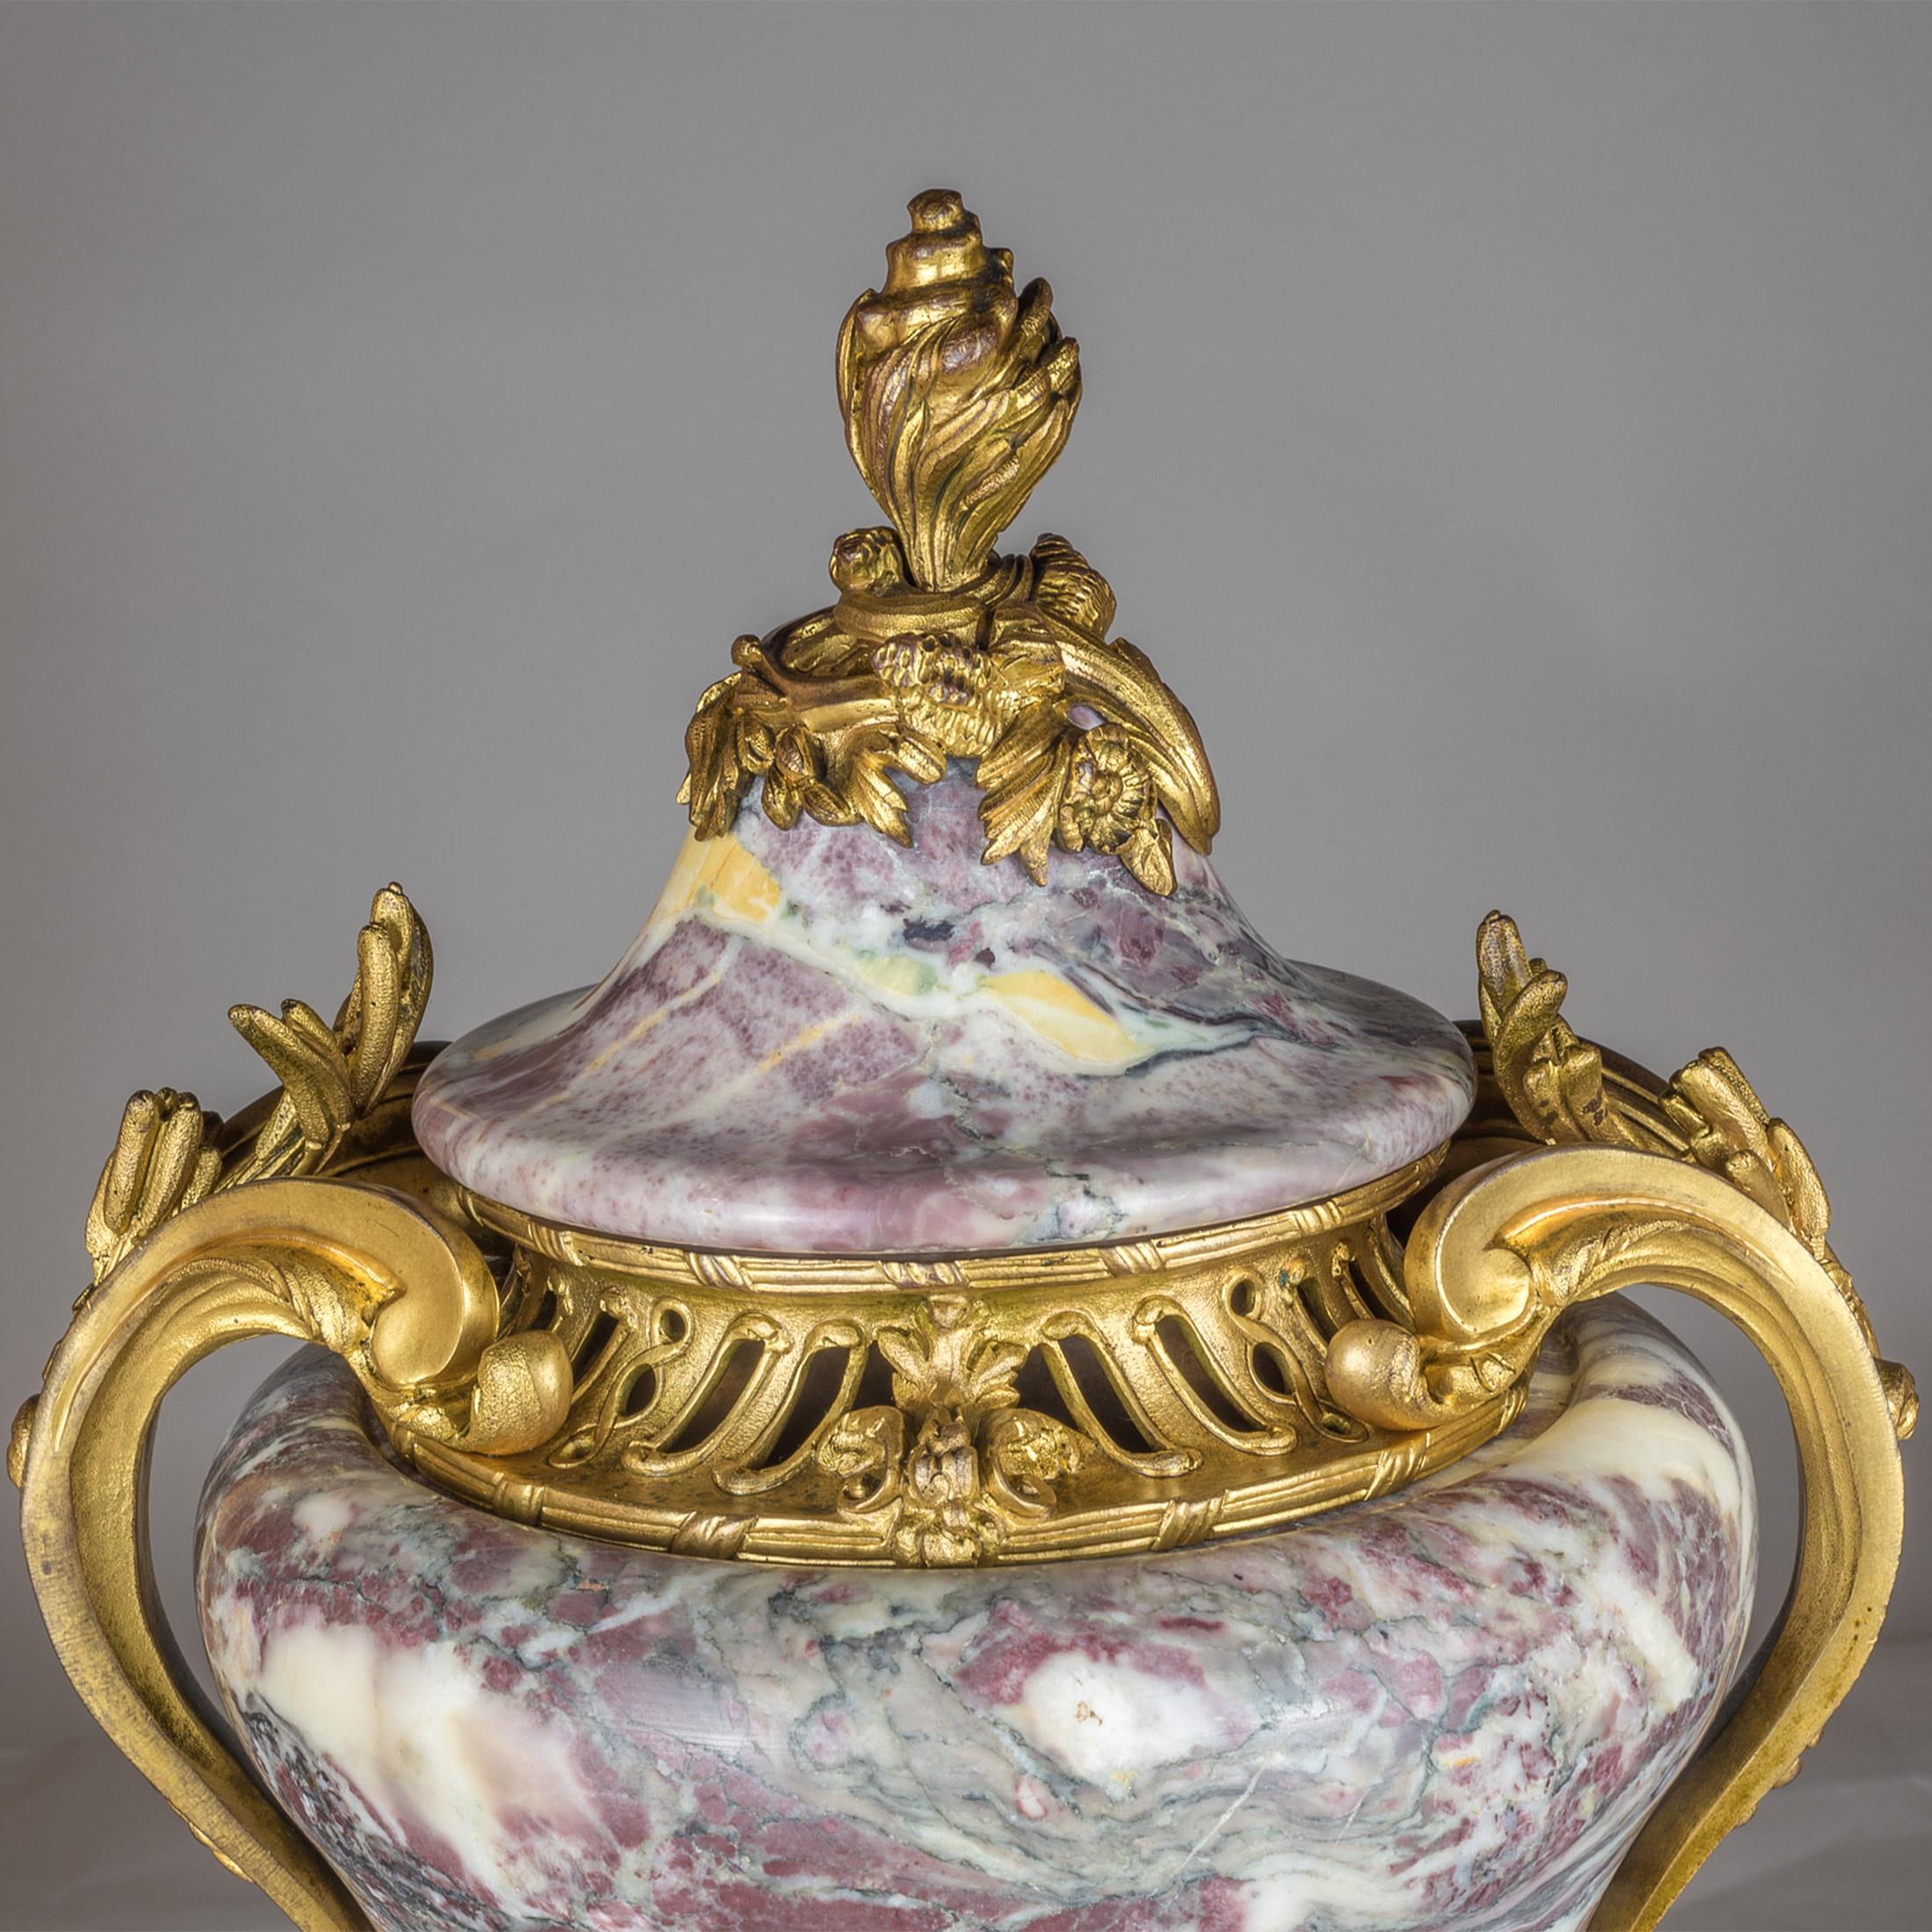 Gilt 19th Century Pair of Louis XV Ormolu-Mounted Sarrancolin Marble Urn and Cover For Sale